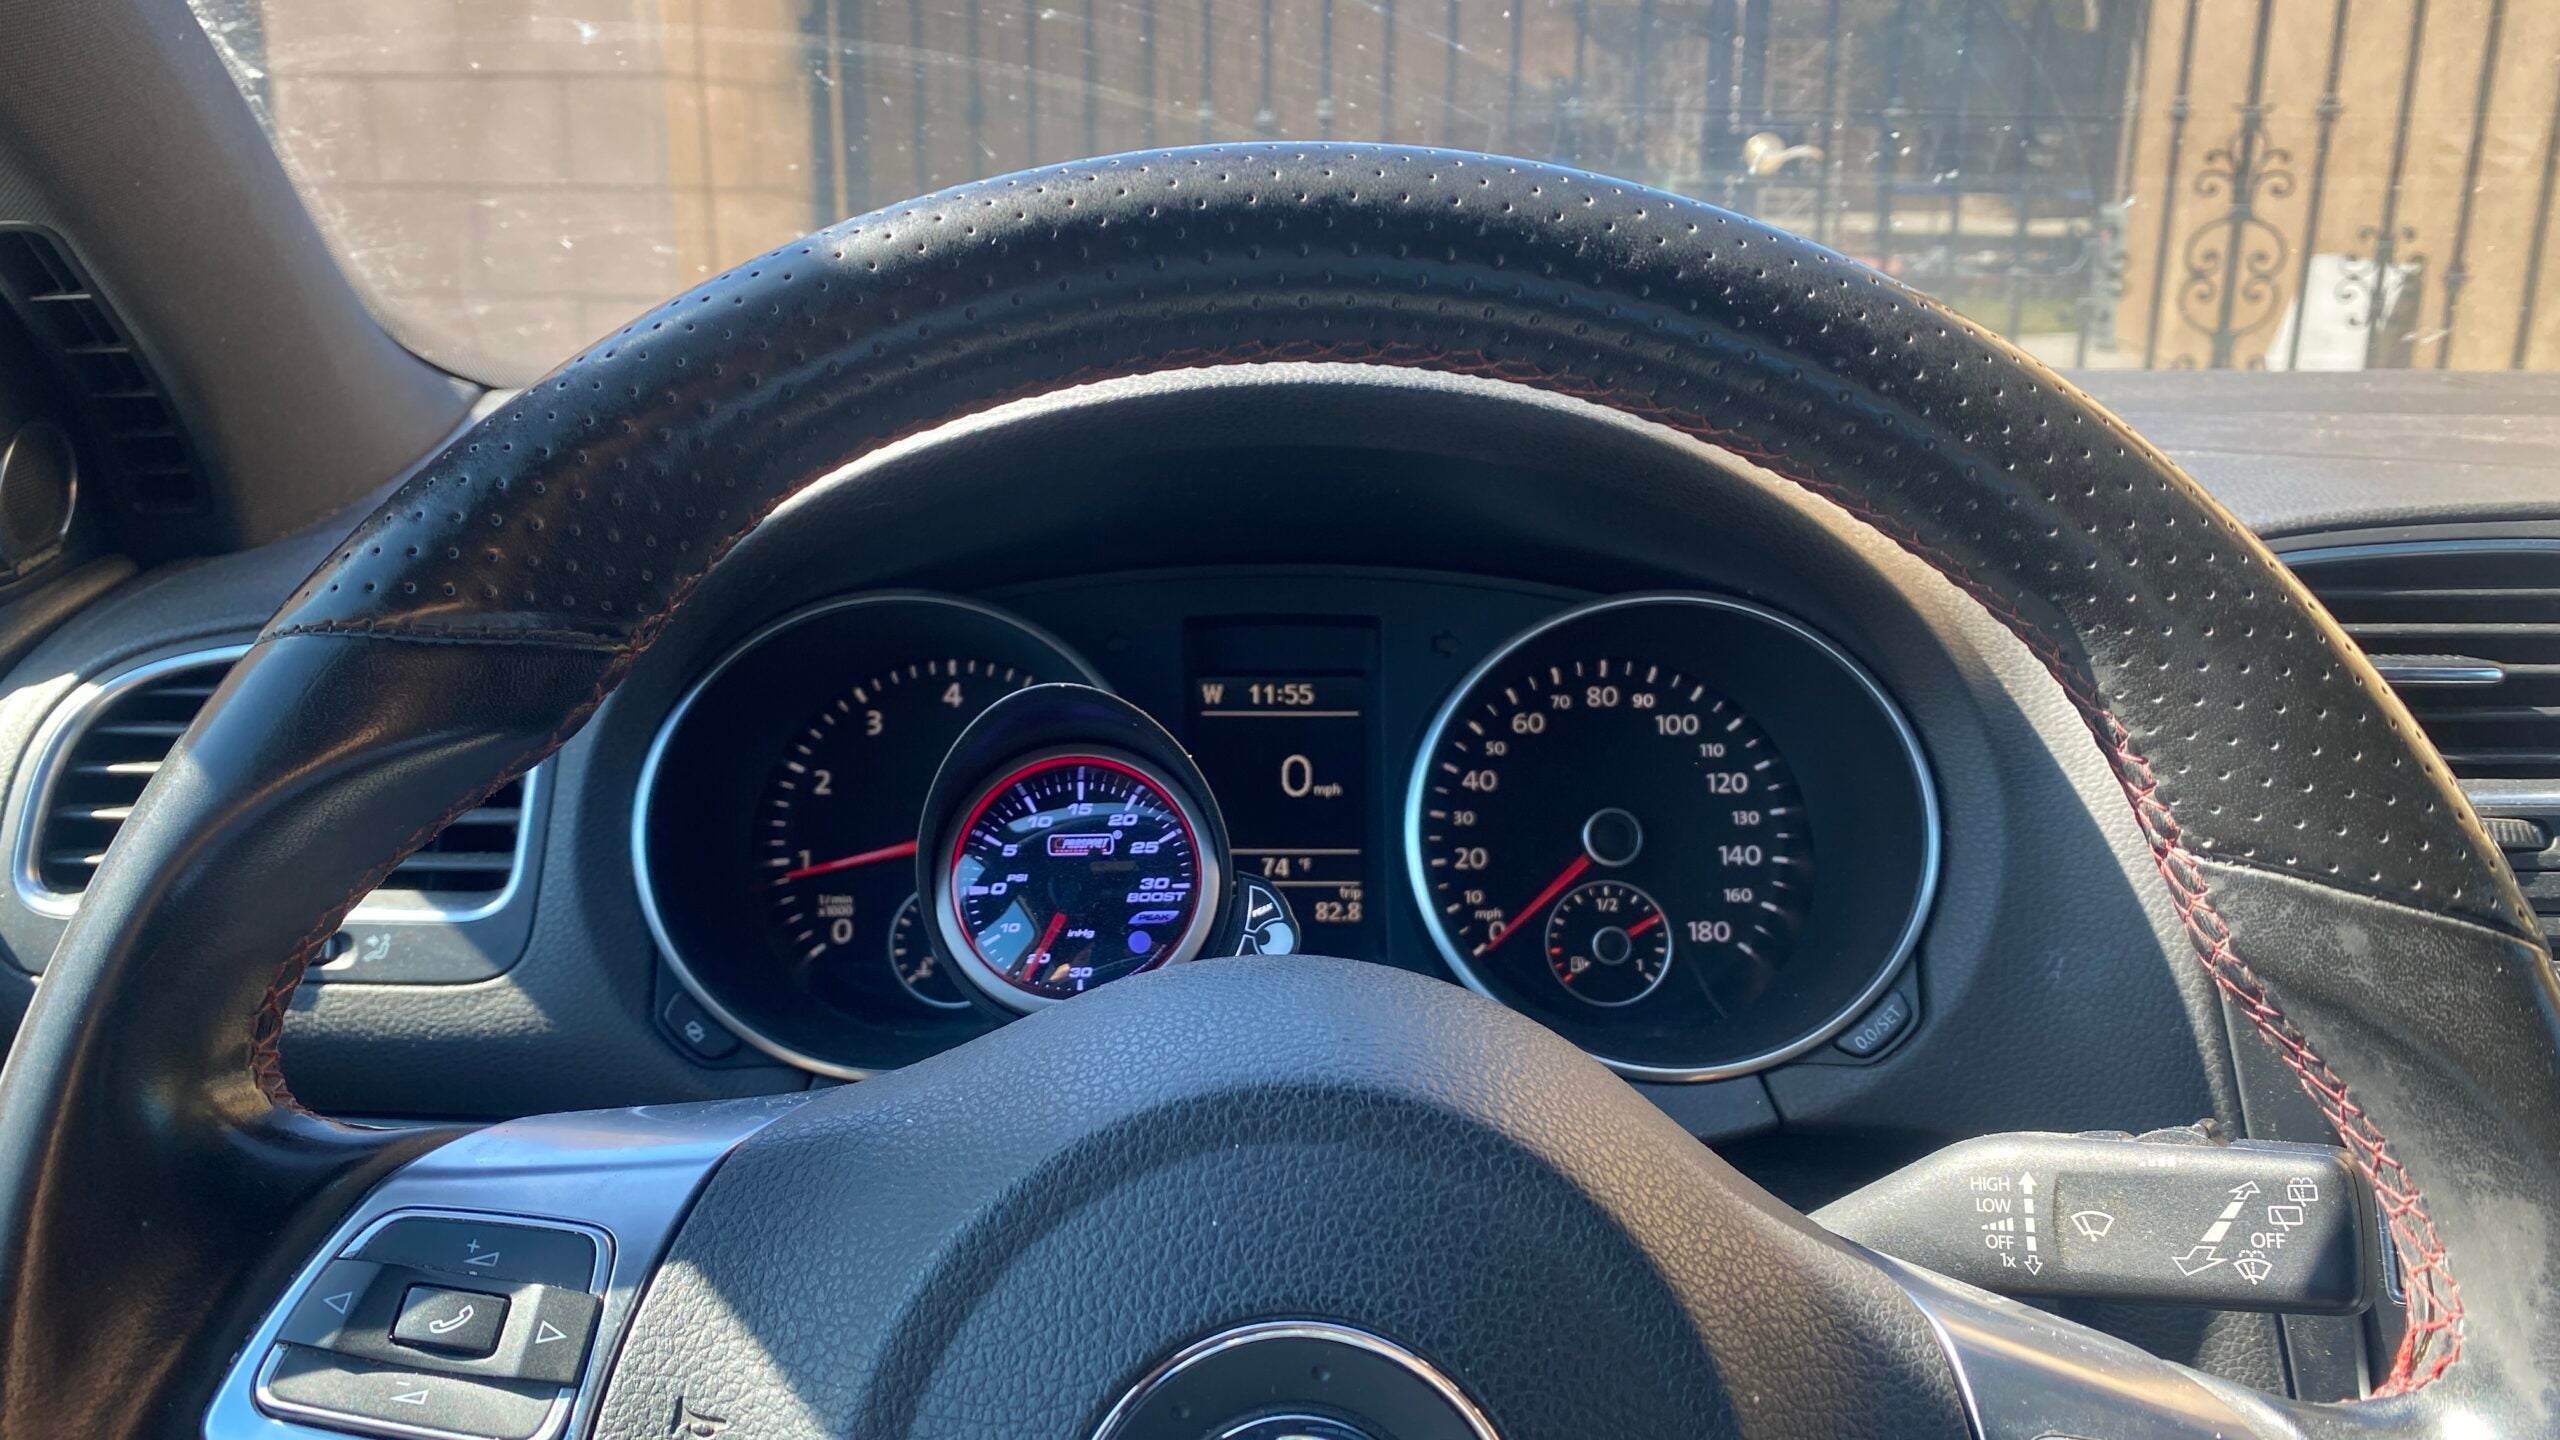 A 2010 VW GTI gauge cluster with a Prosport boost gauge in front of it.